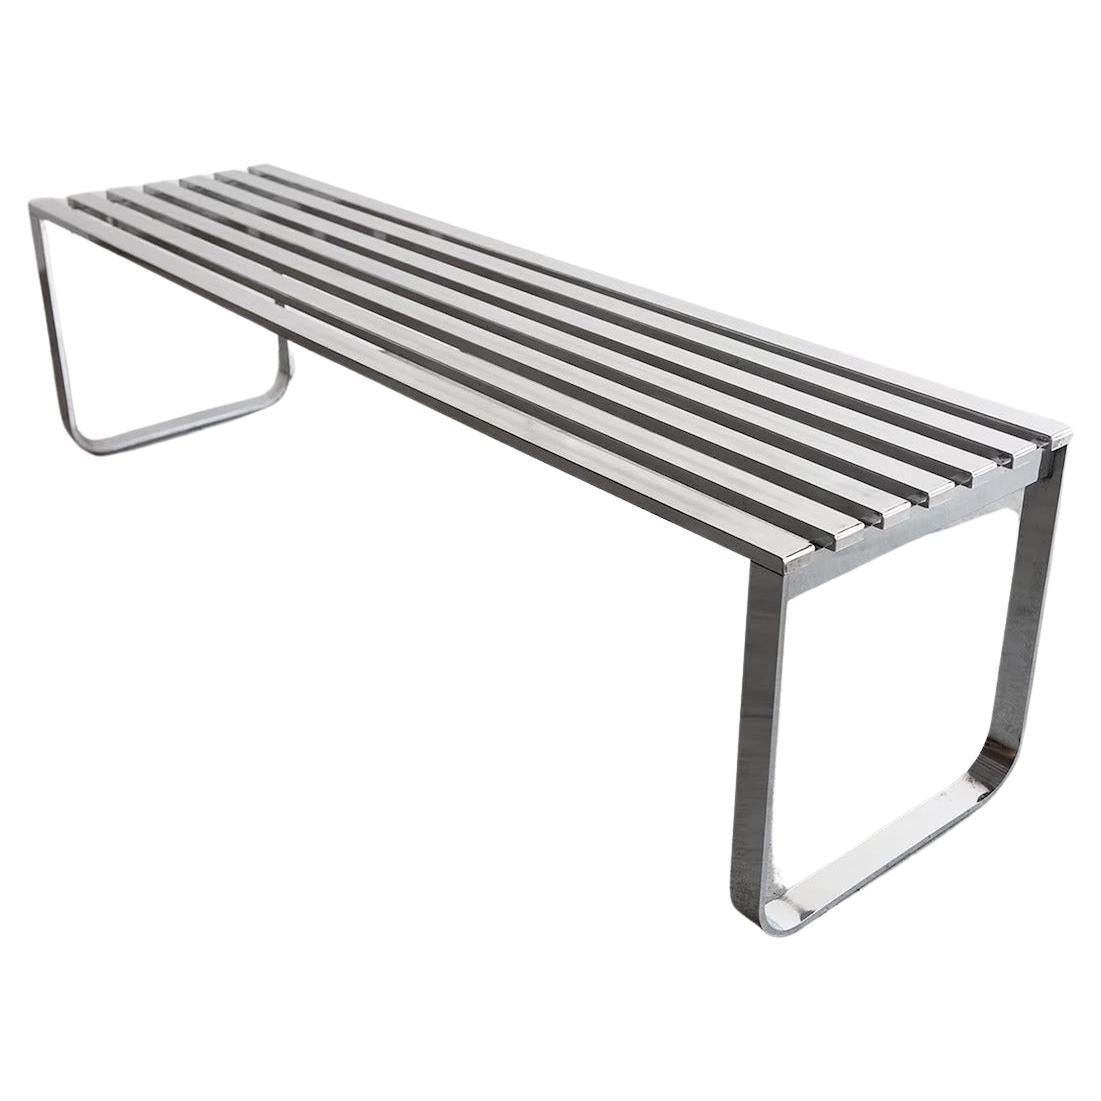 Vintage Milo Baughman Chrome Slatted Coffee Table Bench for DIA circa 1970s For Sale